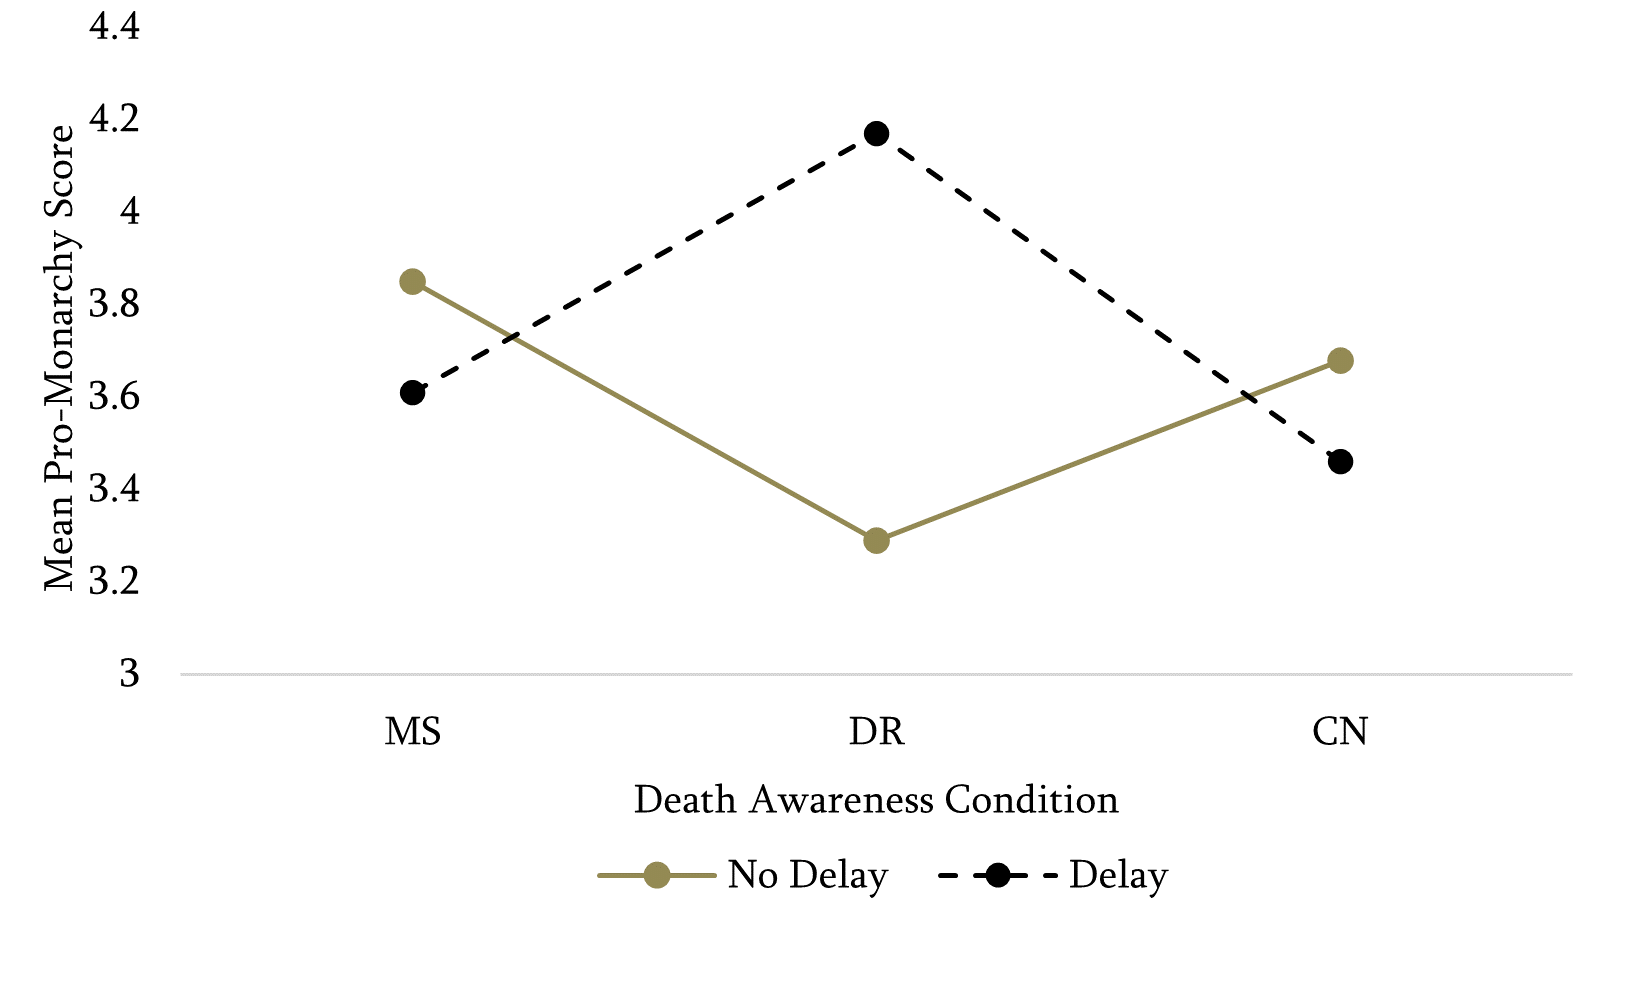 The graph shows the interaction between mortality condition (scale shows MS, DR, CN) and delay (graph shows two distinct lines for Delay and No Delay) on mean pro-monarchy score (scale shows 3 to 4.4 in 0.2 increments). Graph shows for no delay a mean score of 3.85, 3.29, 3.68 for MS, DR, and CN respectively. Graph shows for delay a mean score of 3.61, 4.17, 3.46 for MS, DR, and CN respectively. Visually, the two lines mirror each other along the X axis.